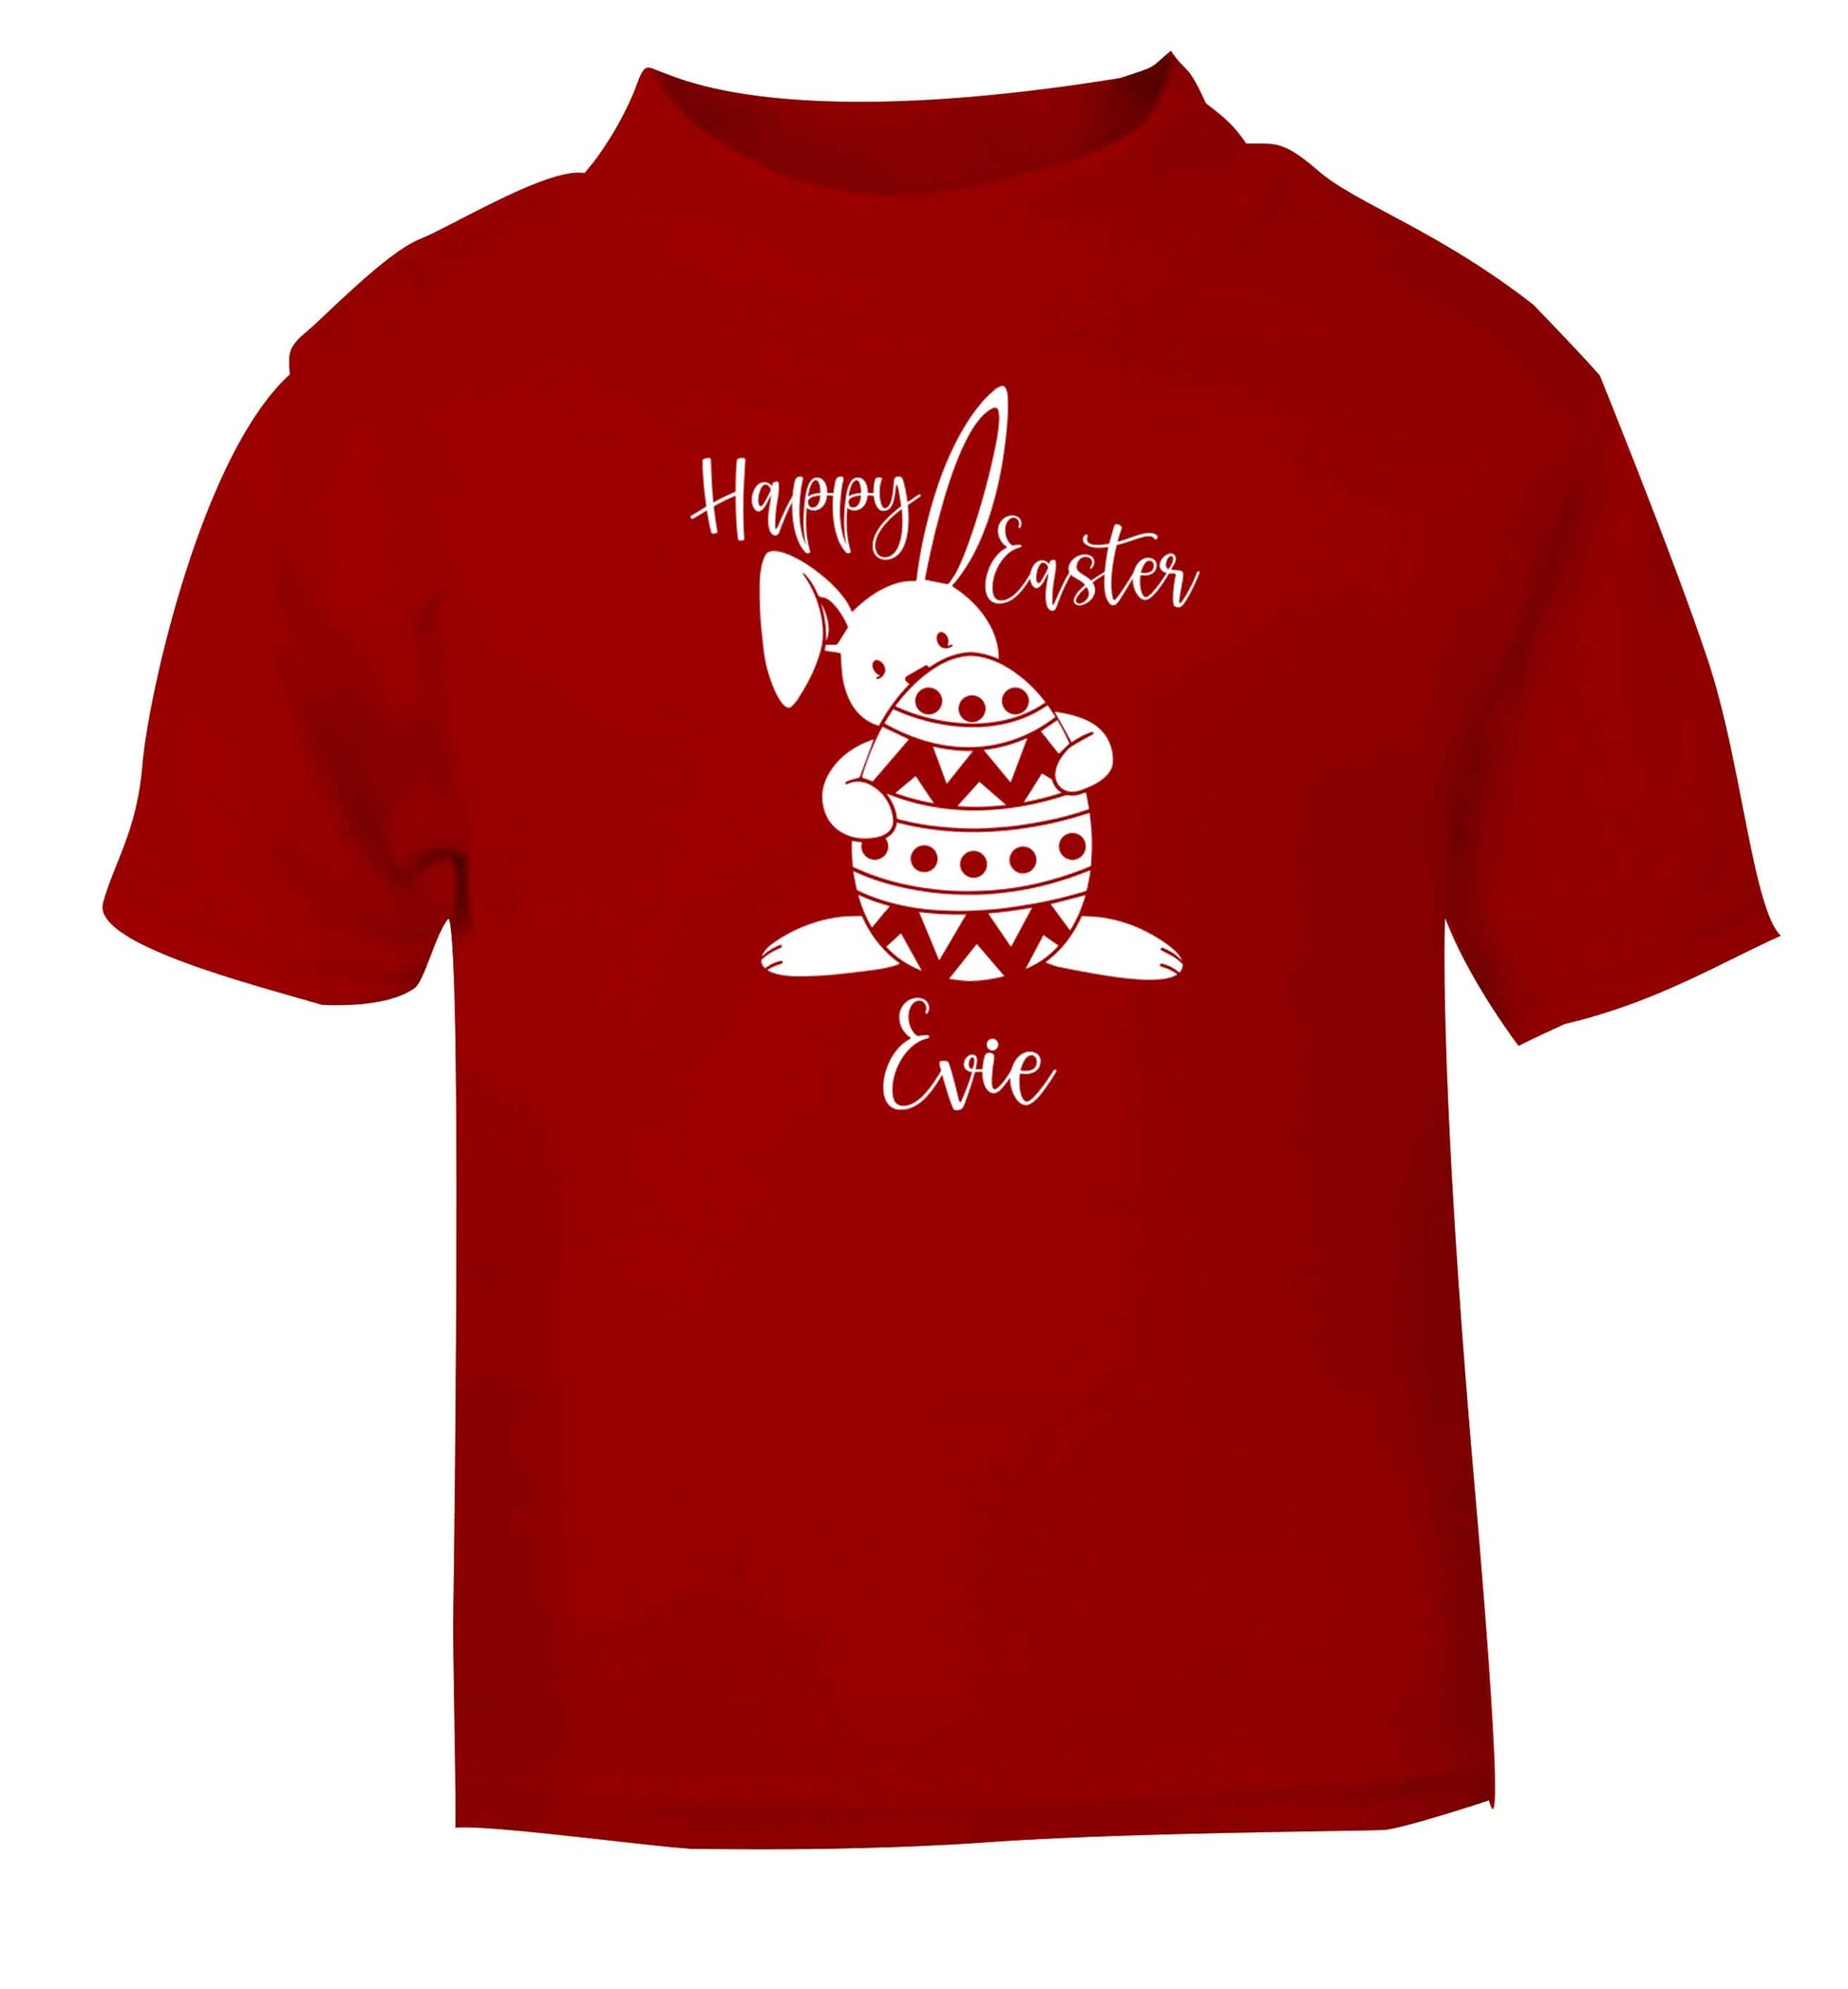 Happy Easter - personalised red baby toddler Tshirt 2 Years